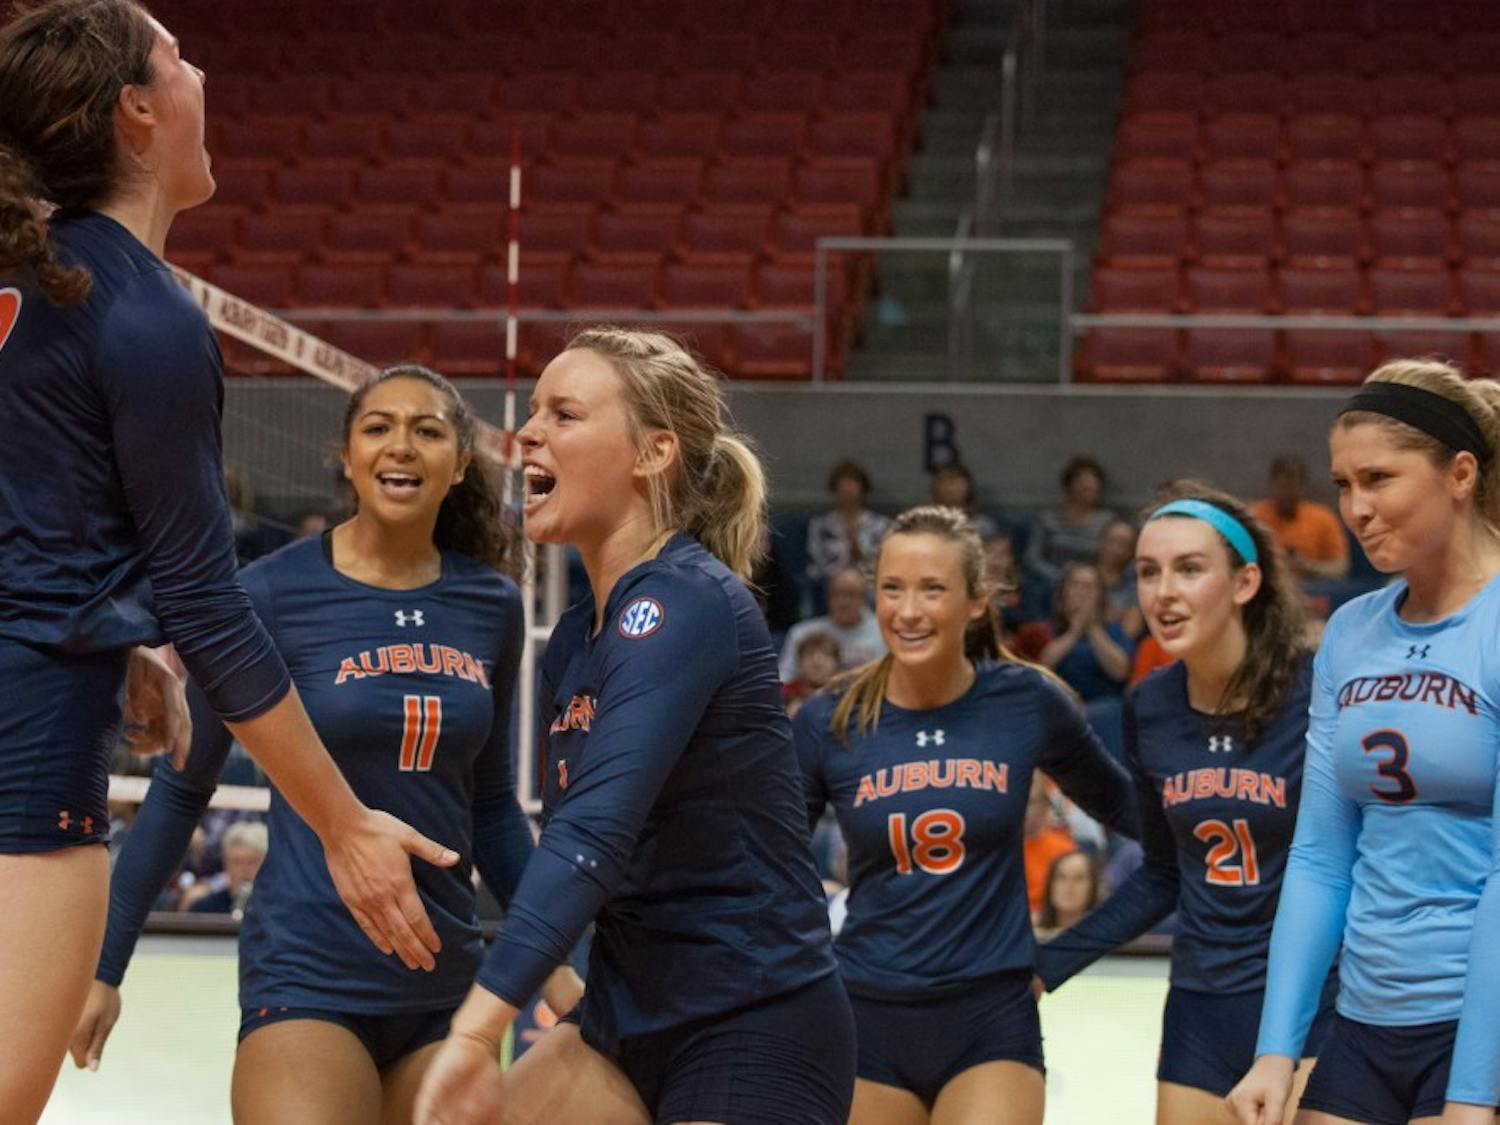 The team celebrating Brenna McIlroy's score against LSU on Oct. 4 at Auburn Arena.